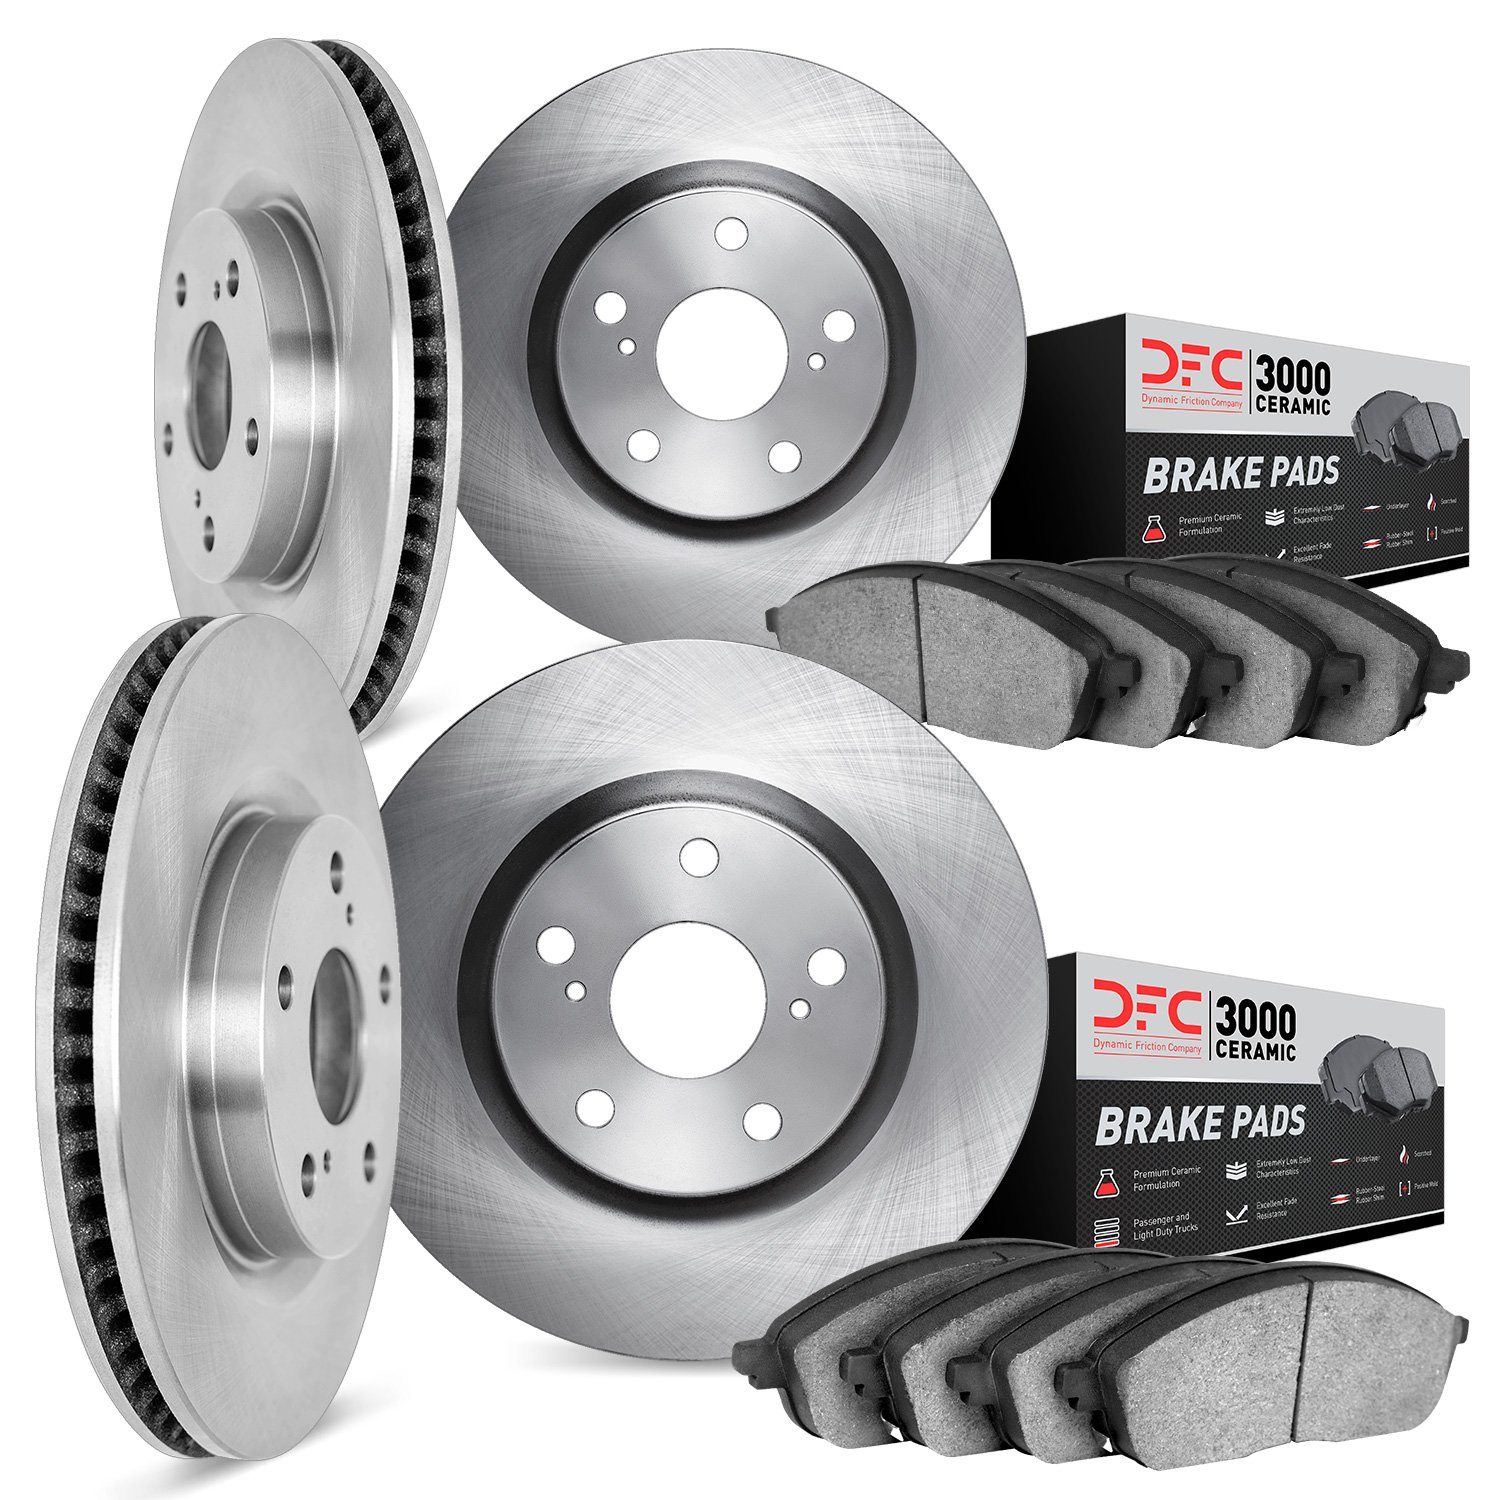 6304-76010 Brake Rotors with 3000-Series Ceramic Brake Pads Kit, 1991-1995 Lexus/Toyota/Scion, Position: Front and Rear